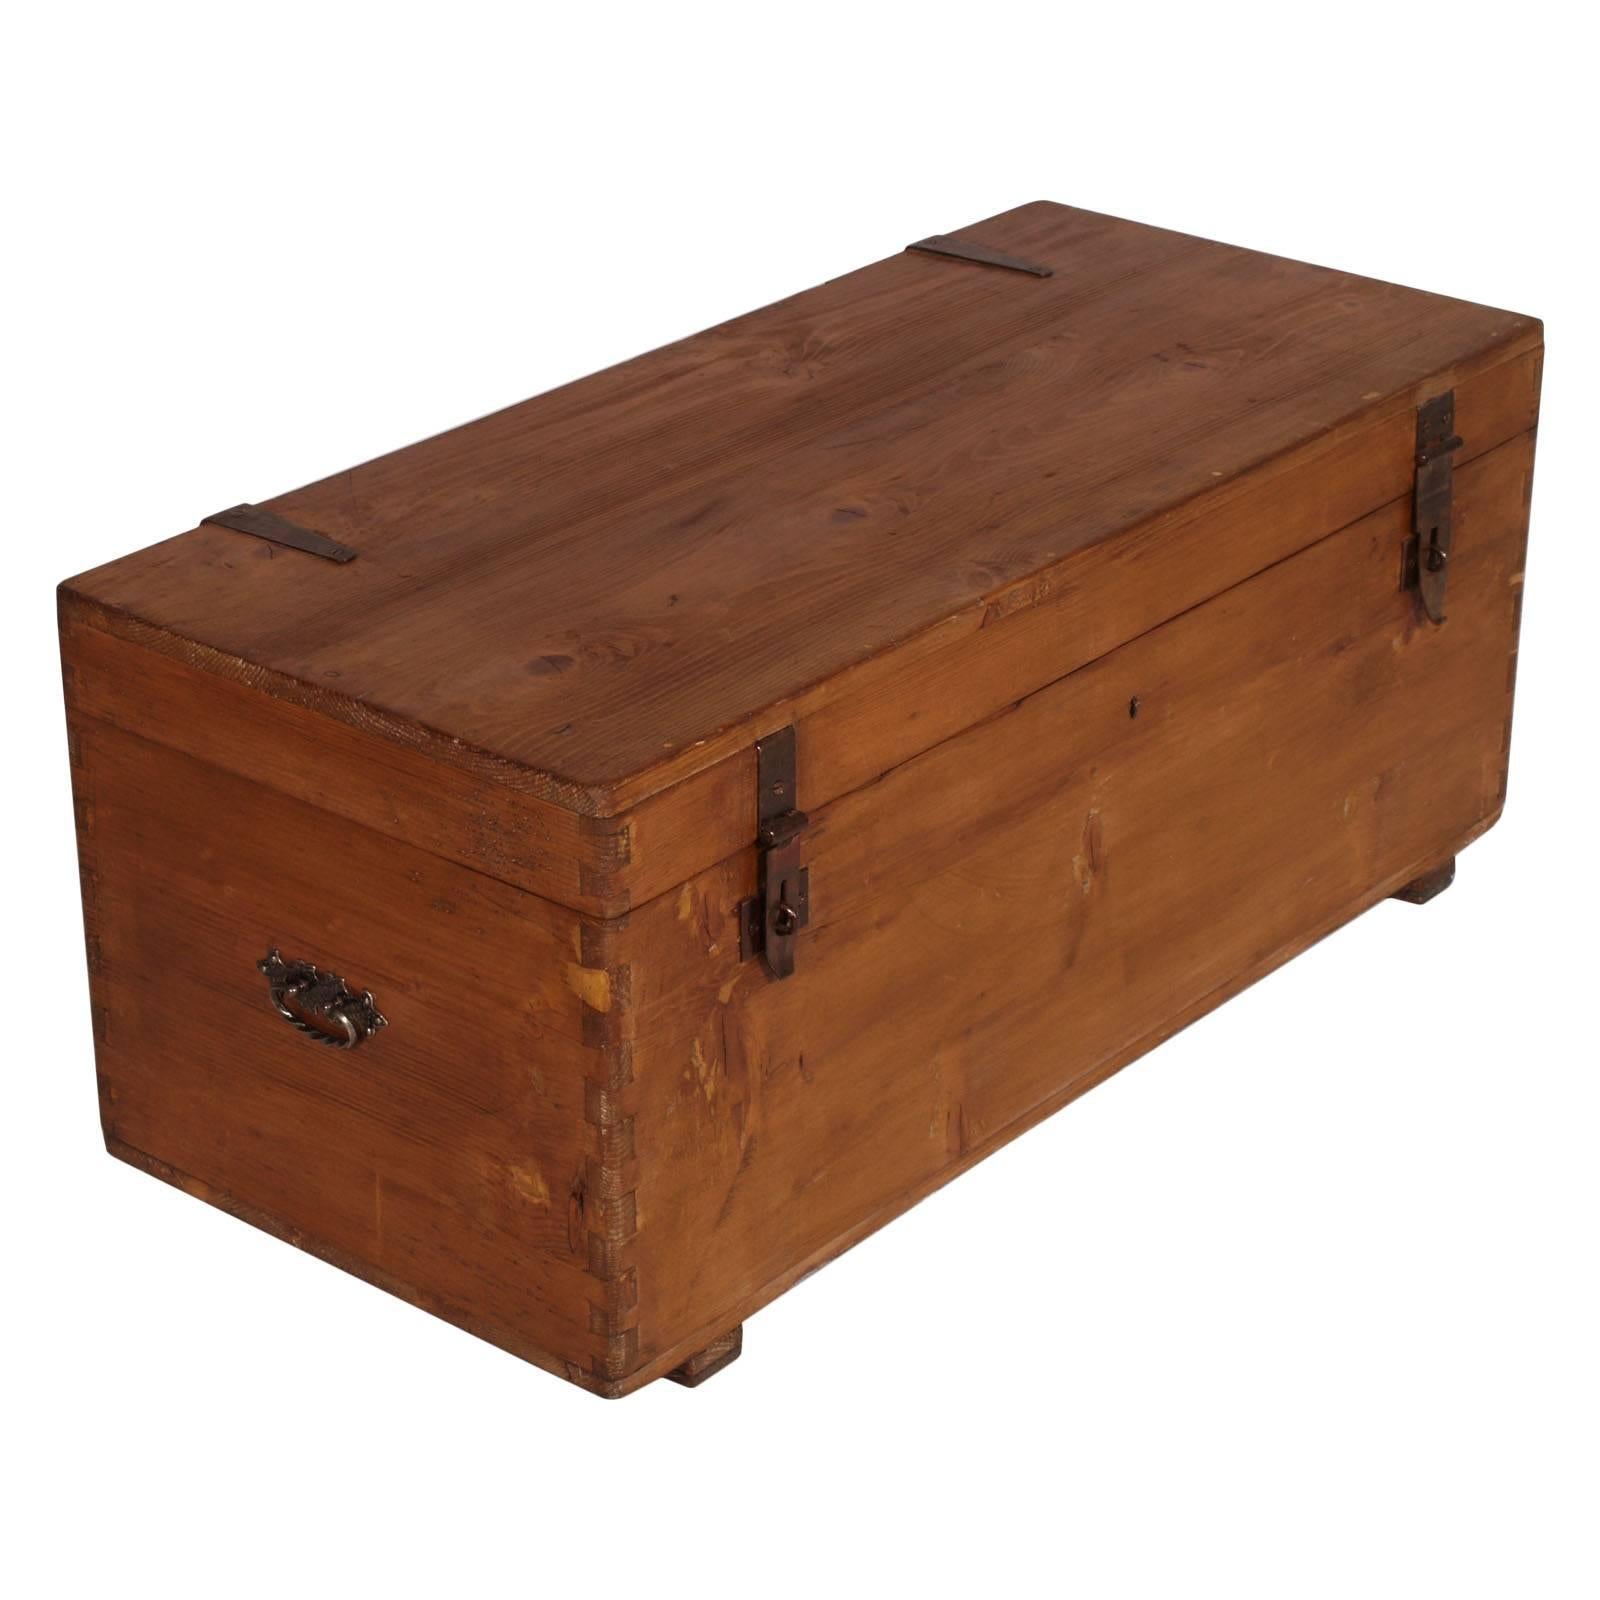 Last 19th Century Traveling Trunk Chest in Solid Wood Restored Polished to Wax